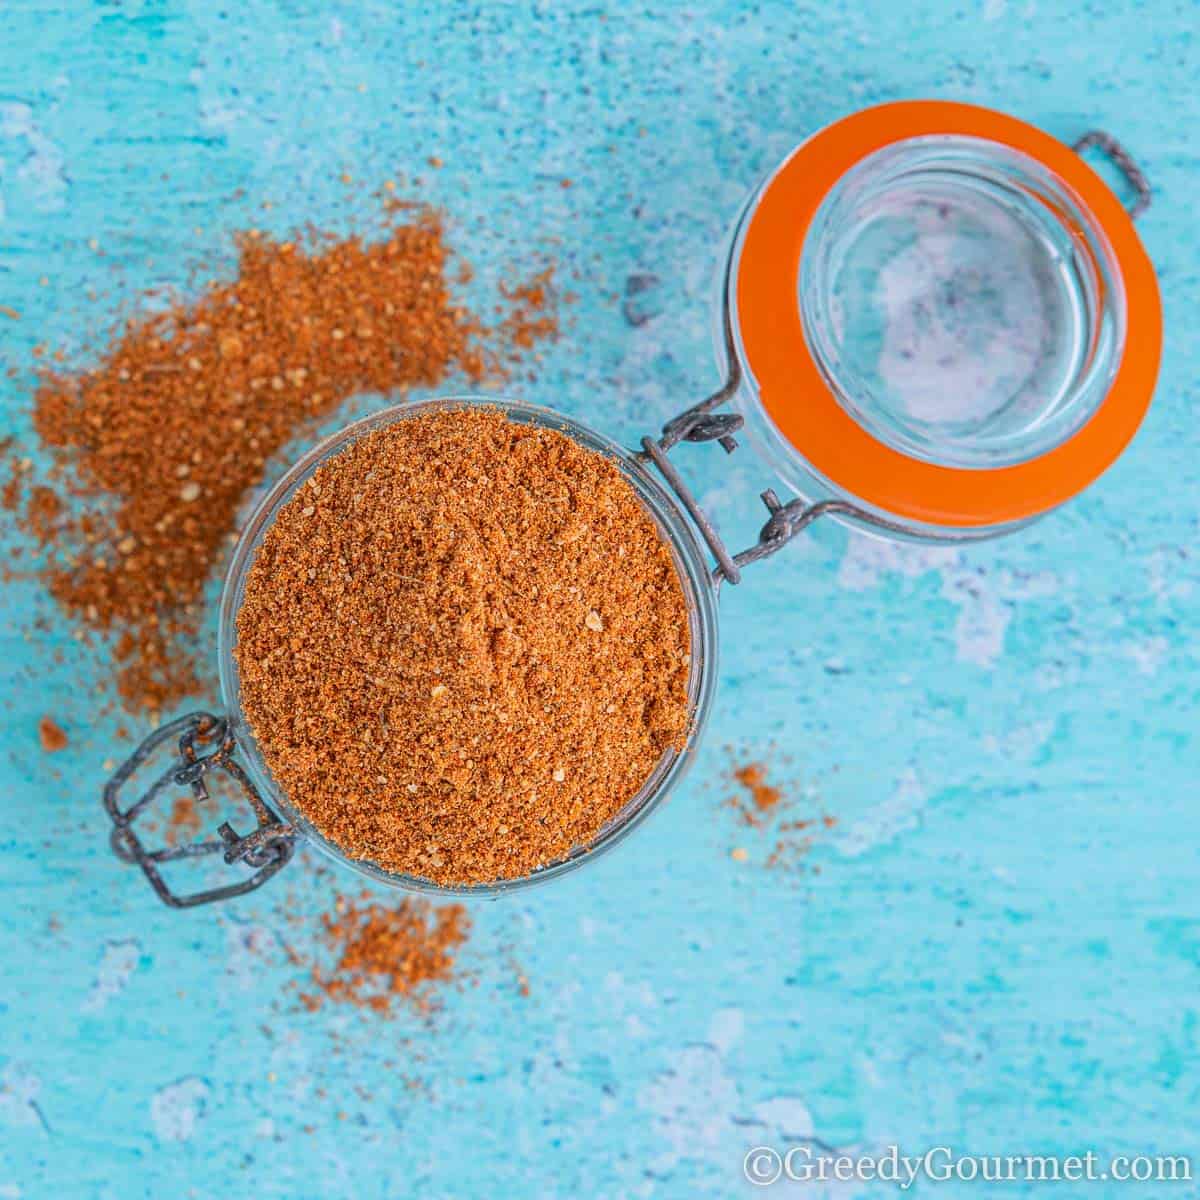 Old Bay Vs. Cajun Seasoning: What's The Difference?